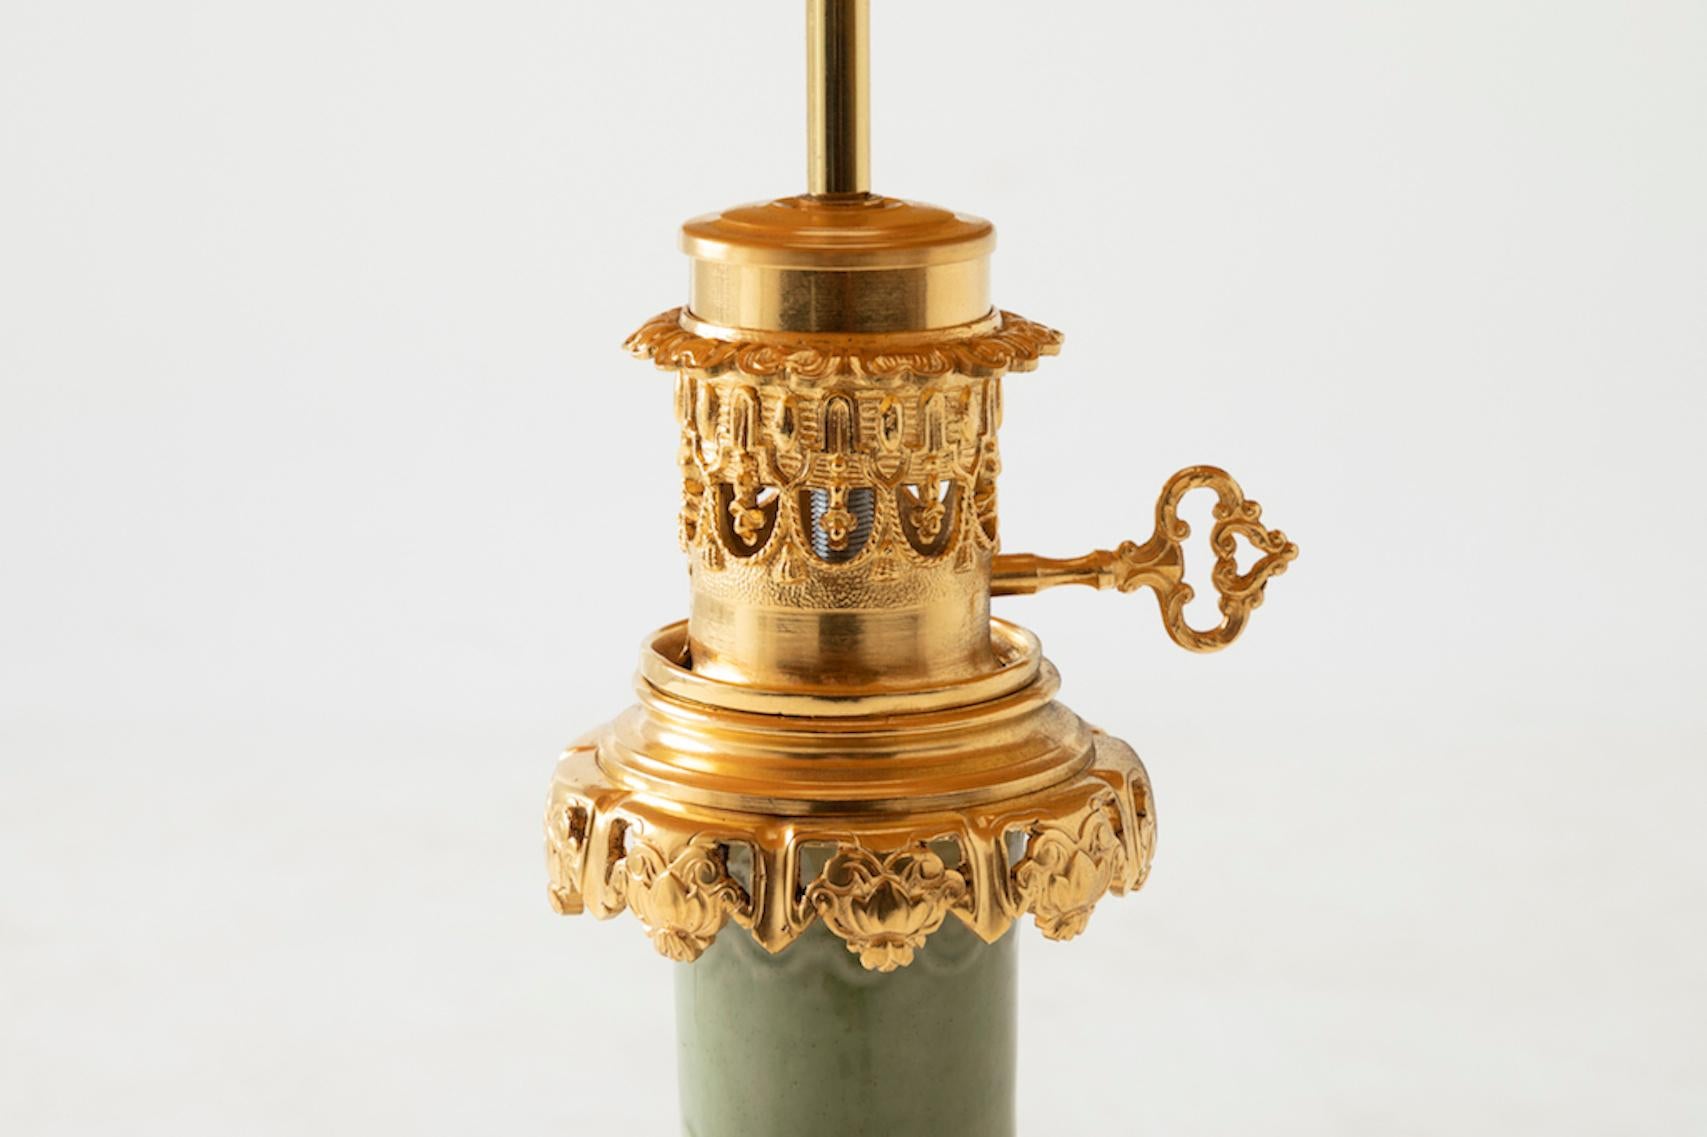 Celadon porcelain lamp, bottle shaped, mounted with chiselled and gilt bronze on a circular openwork base adorned with swirls, leaves and cartouches. Higher part of the mount is also openwork and decorated of small cartouches, trimming and a